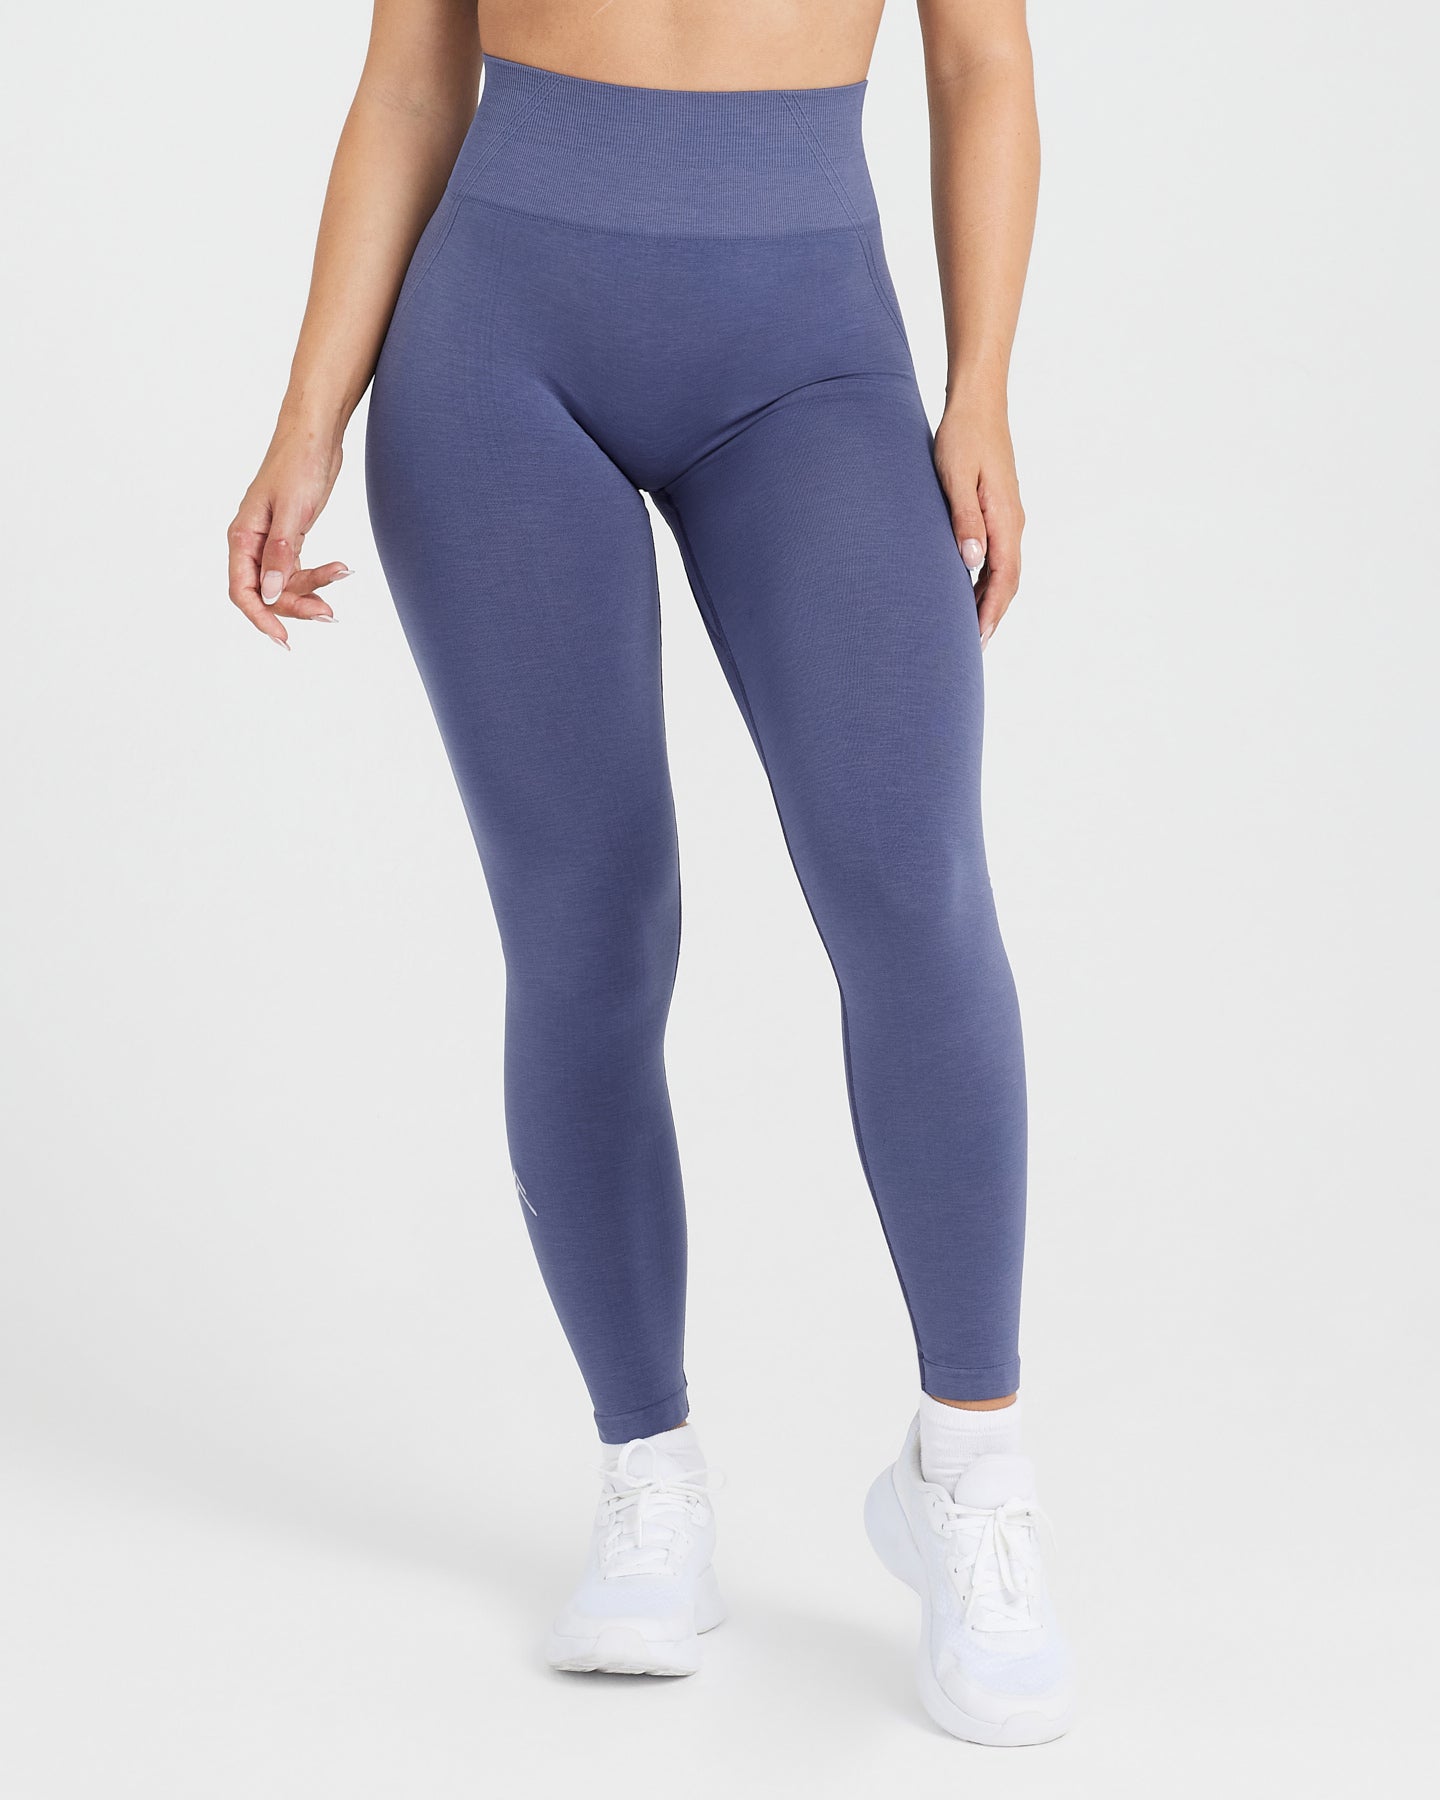 PURE BARRE By Splits59 Size XS Blue Super High Waisted Workout Gym Leggings